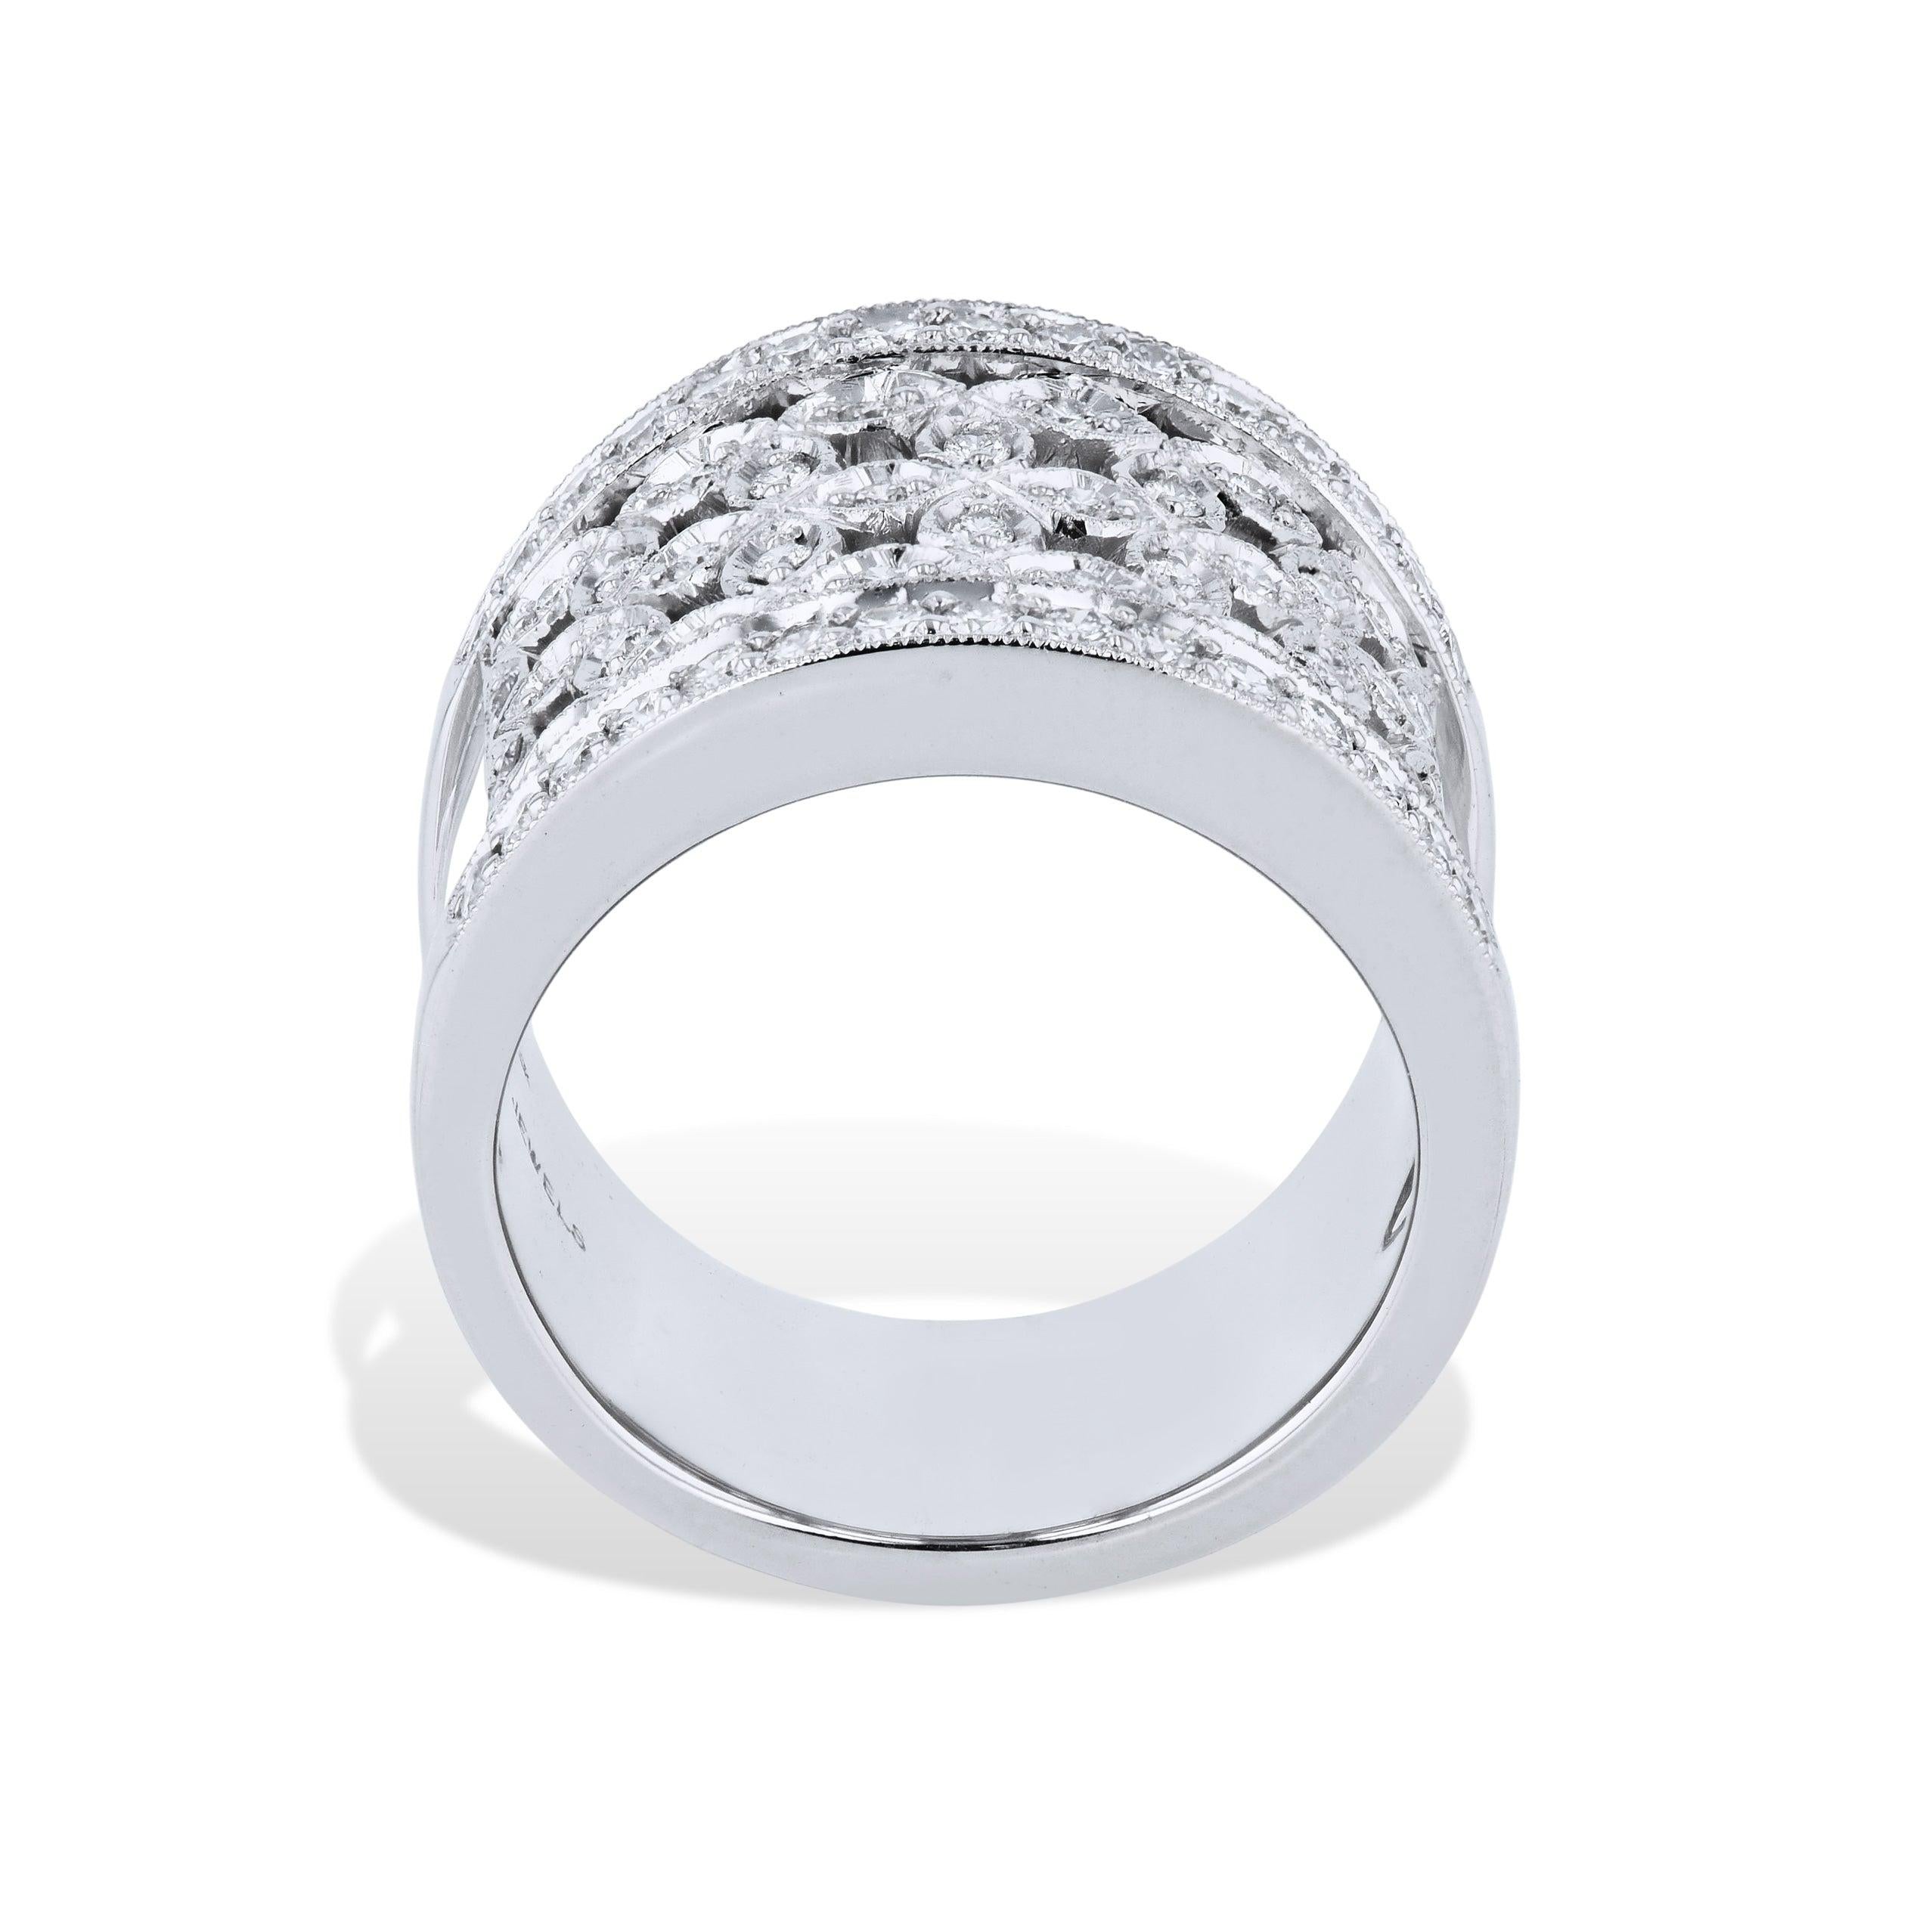 This exquisite Diamond Pave Estate Ring is crafted of dazzling 18kt white gold. Artfully adorned with a stunning total of 62 diamonds will take your breath away! Size 8, you won't be able to resist this beautiful ring!
Diamond Pave White Gold Estate